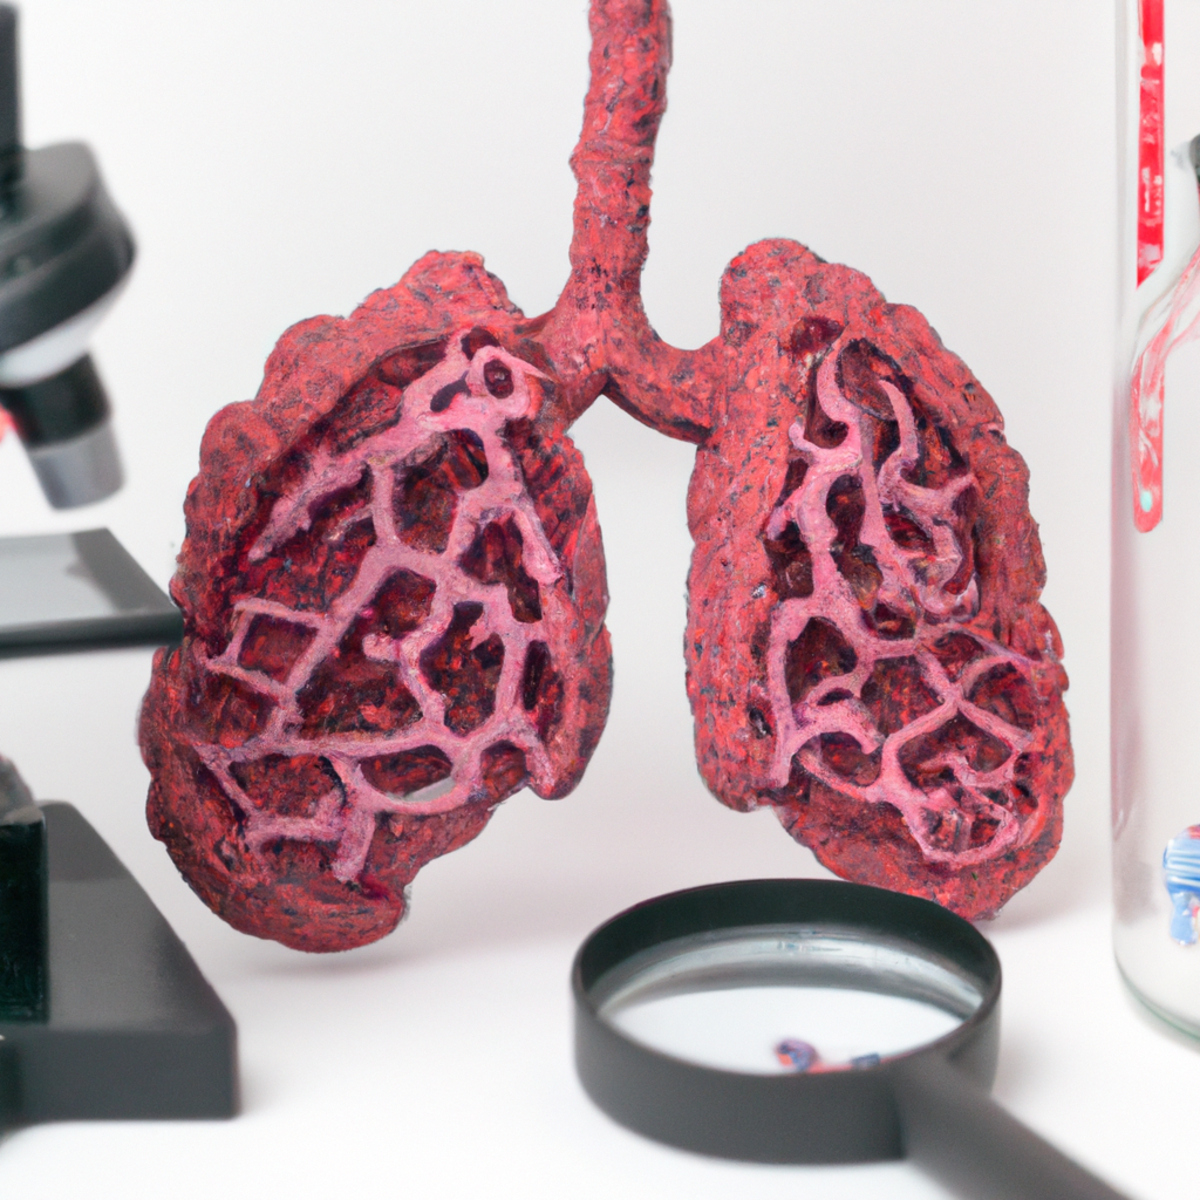 Detailed human lung model with granulomas, stethoscope, and magnifying glass on white surface.